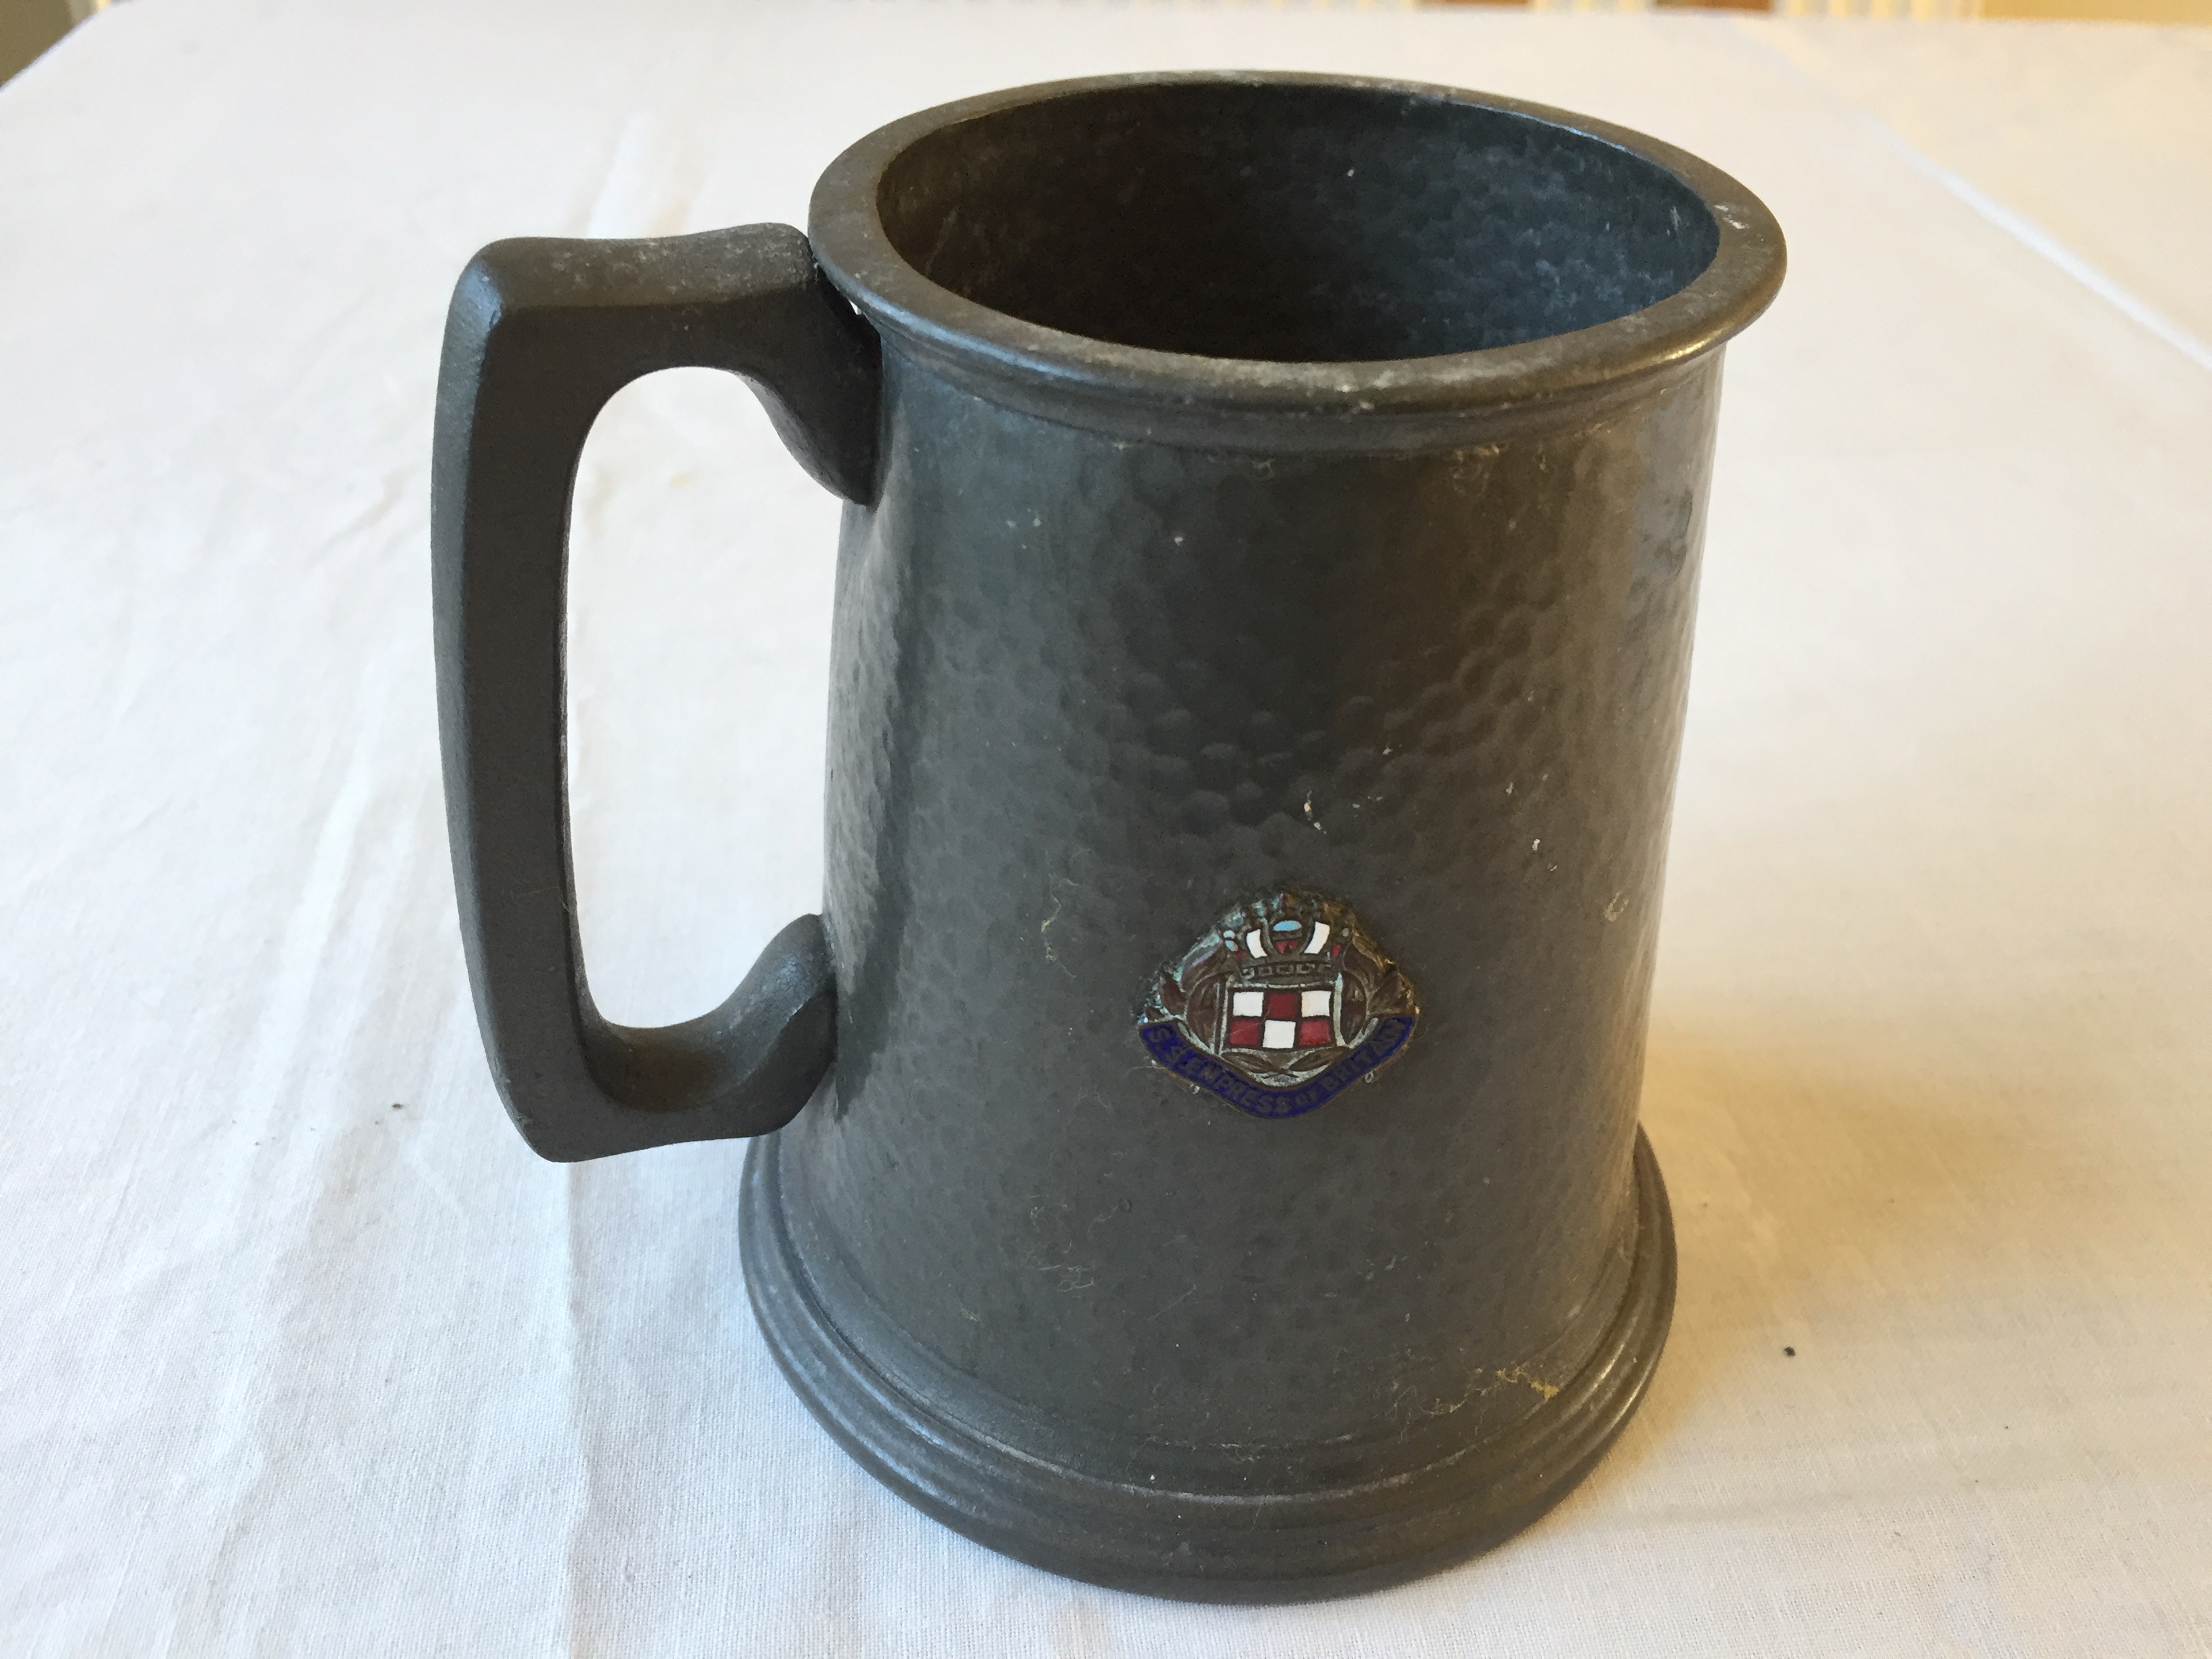 SOUVENIR TANKARD FROM THE CANADIAN PACIFIC VESSEL THE EMPRESS OF BRITAIN